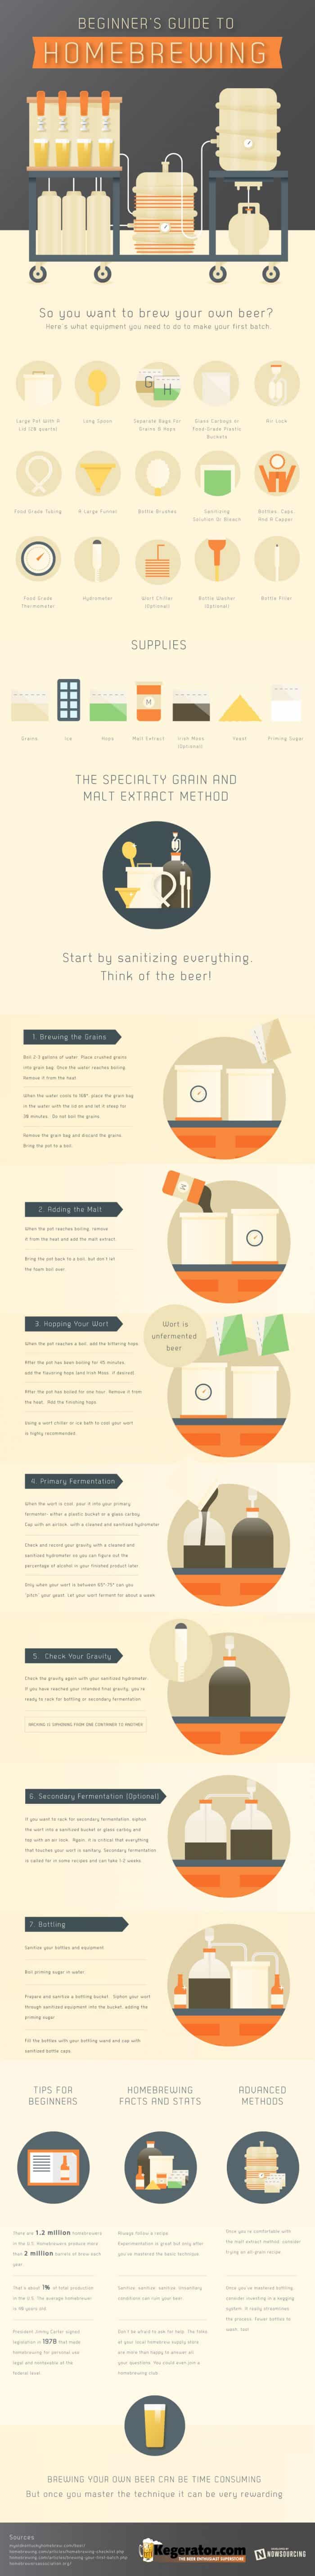 a step by step guide to brewing your own beer at home